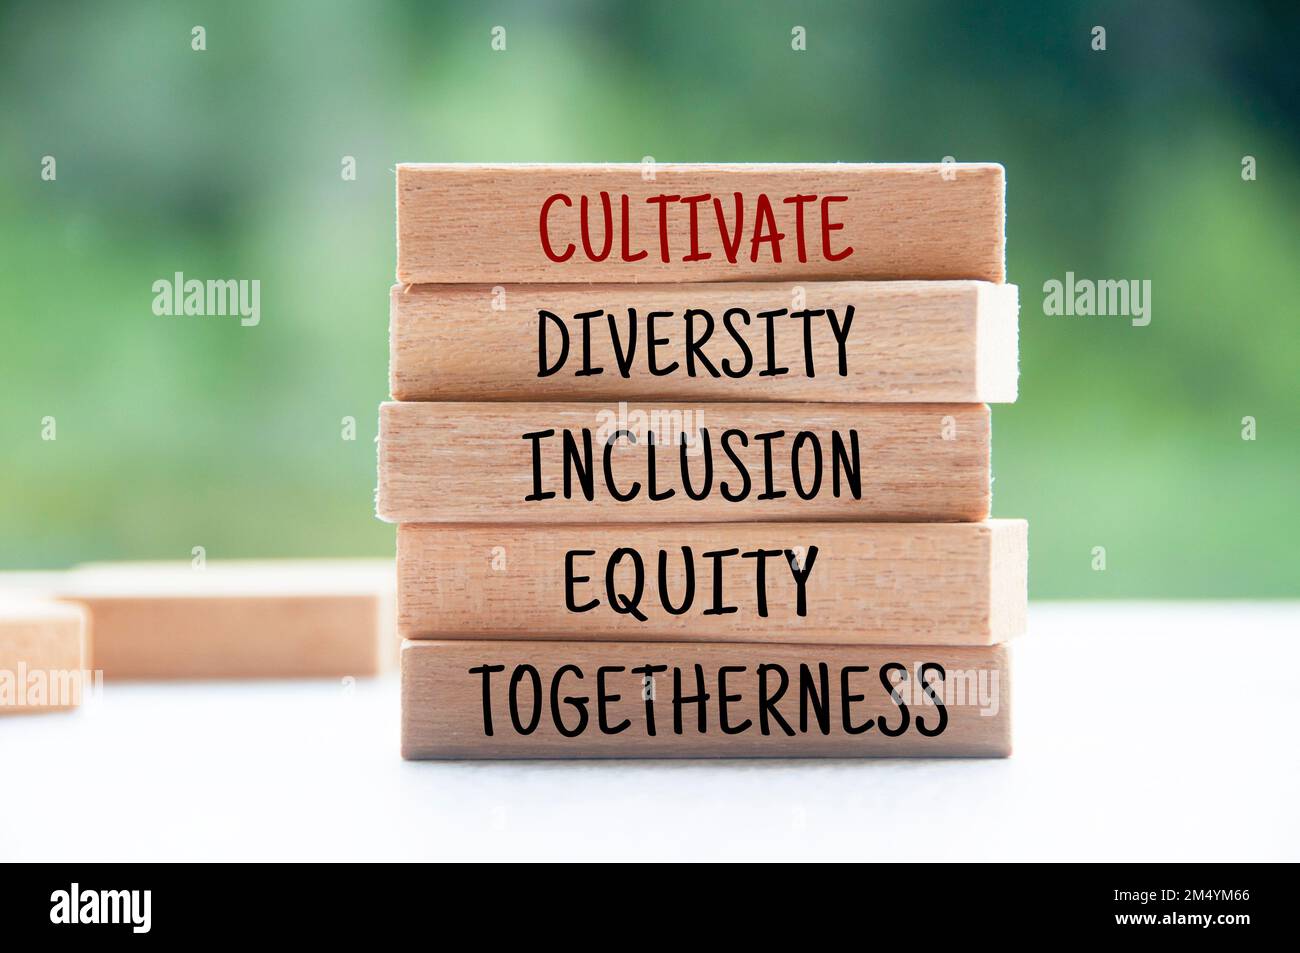 Cultivate diversity, inclusion, equity, togetherness text on wooden blocks with blurred nature background. Stock Photo